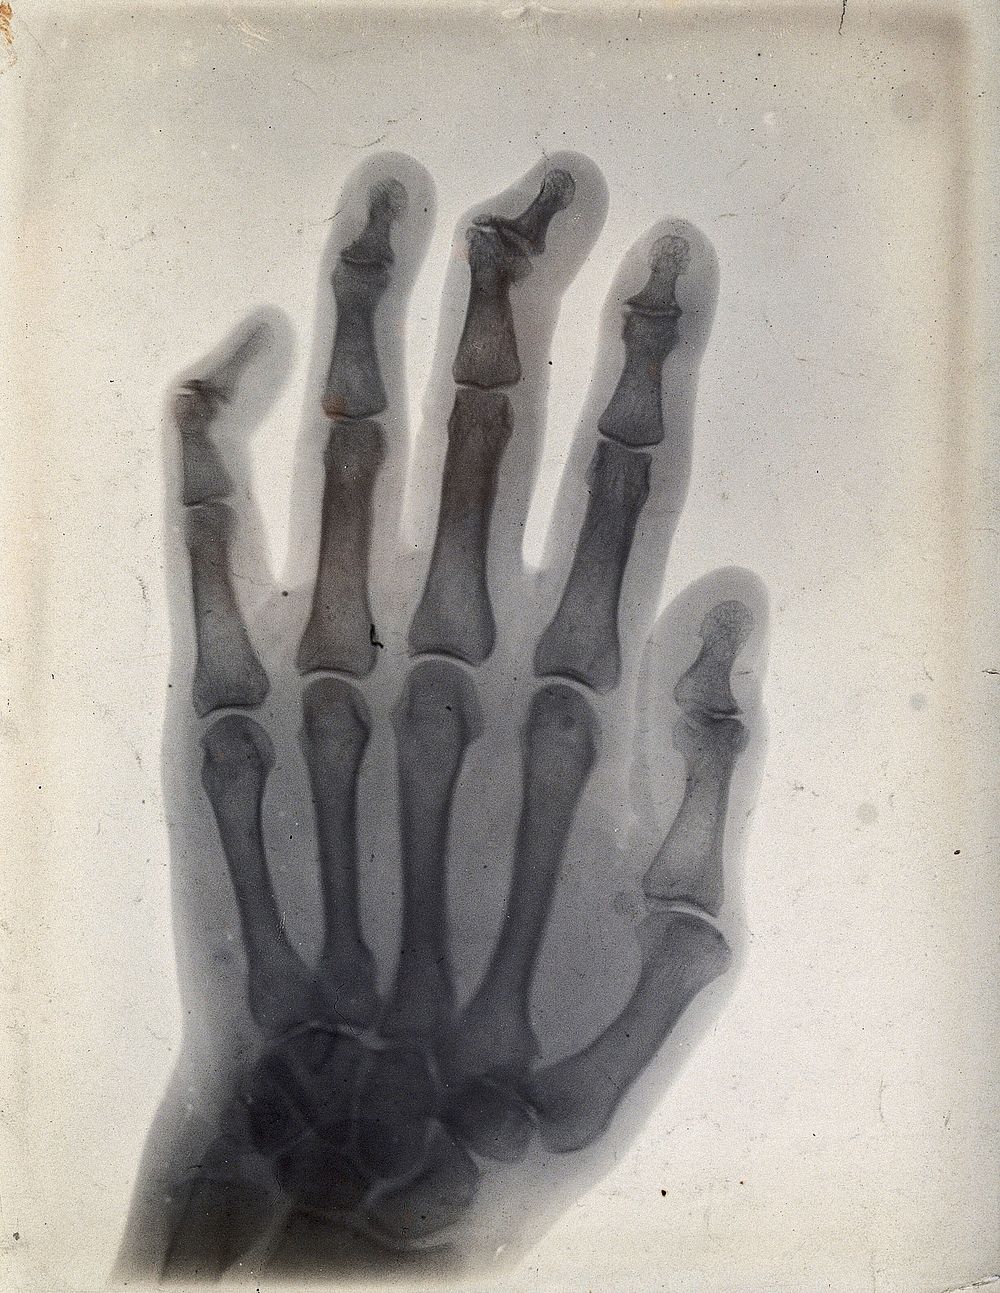 The bones of a hand, viewed through x-ray. Photoprint from radiograph after Sir Arthur Schuster, 1896.